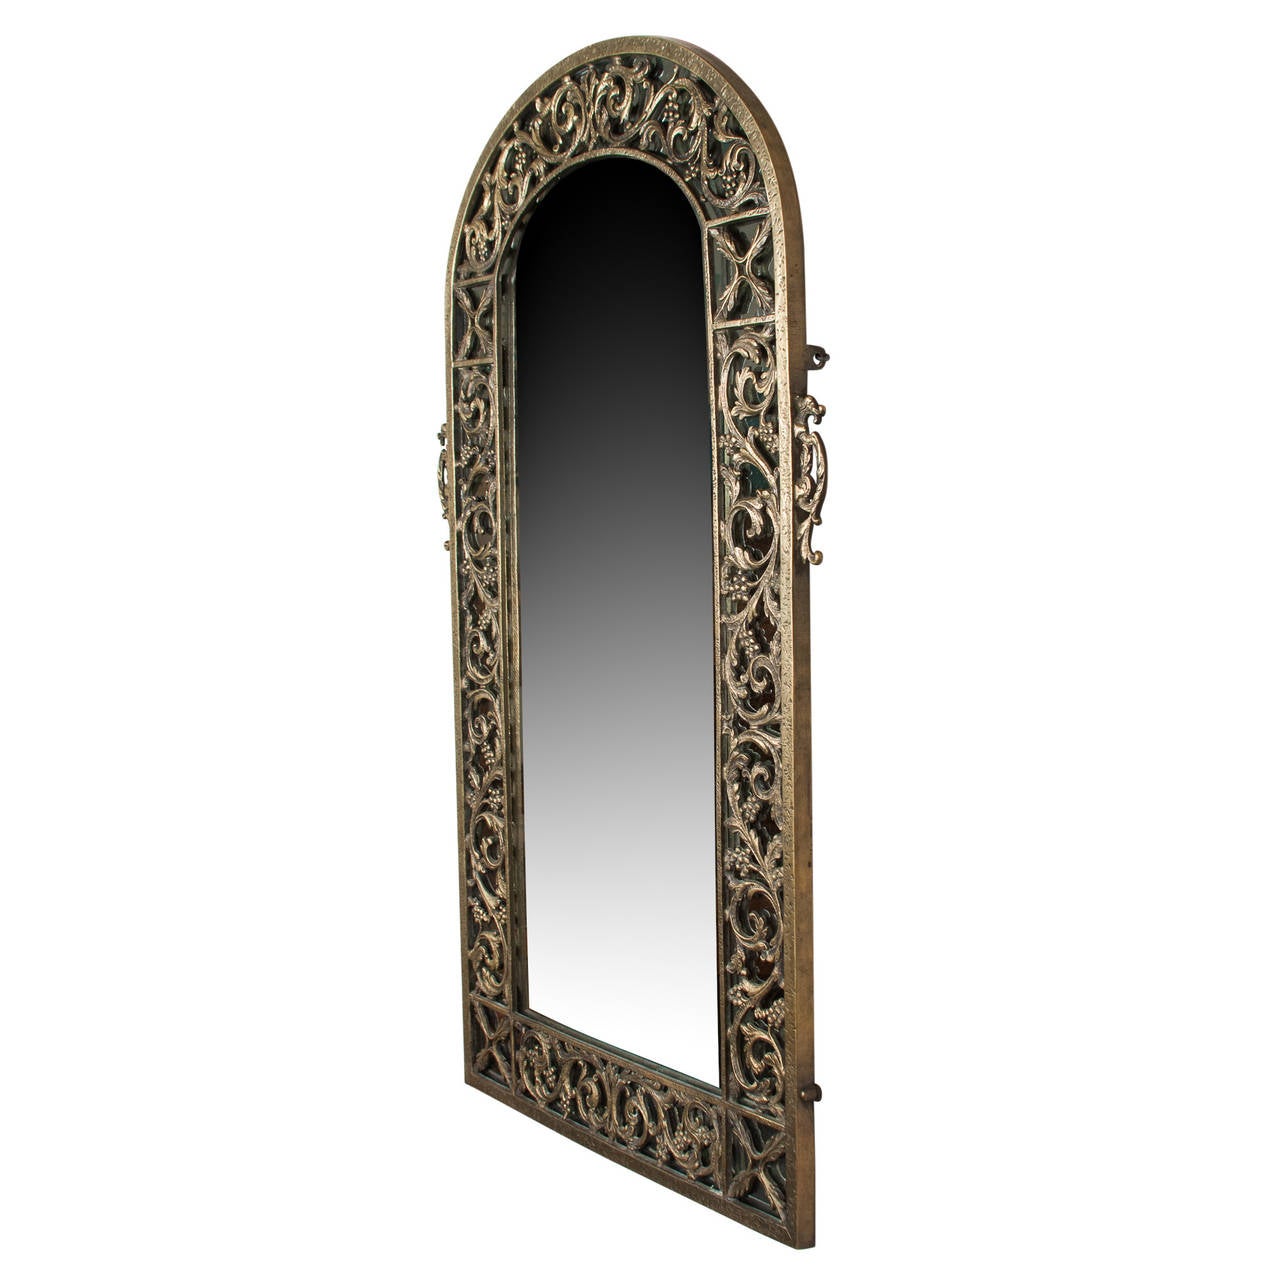 Bronze articulated frame mirror, with vine and acanthus leaf decoration, rounded top, rectangular bottom, by Oscar Bach, American 1920s. Height 35 in, width 21 1/2 in. (Item #2259 sats)